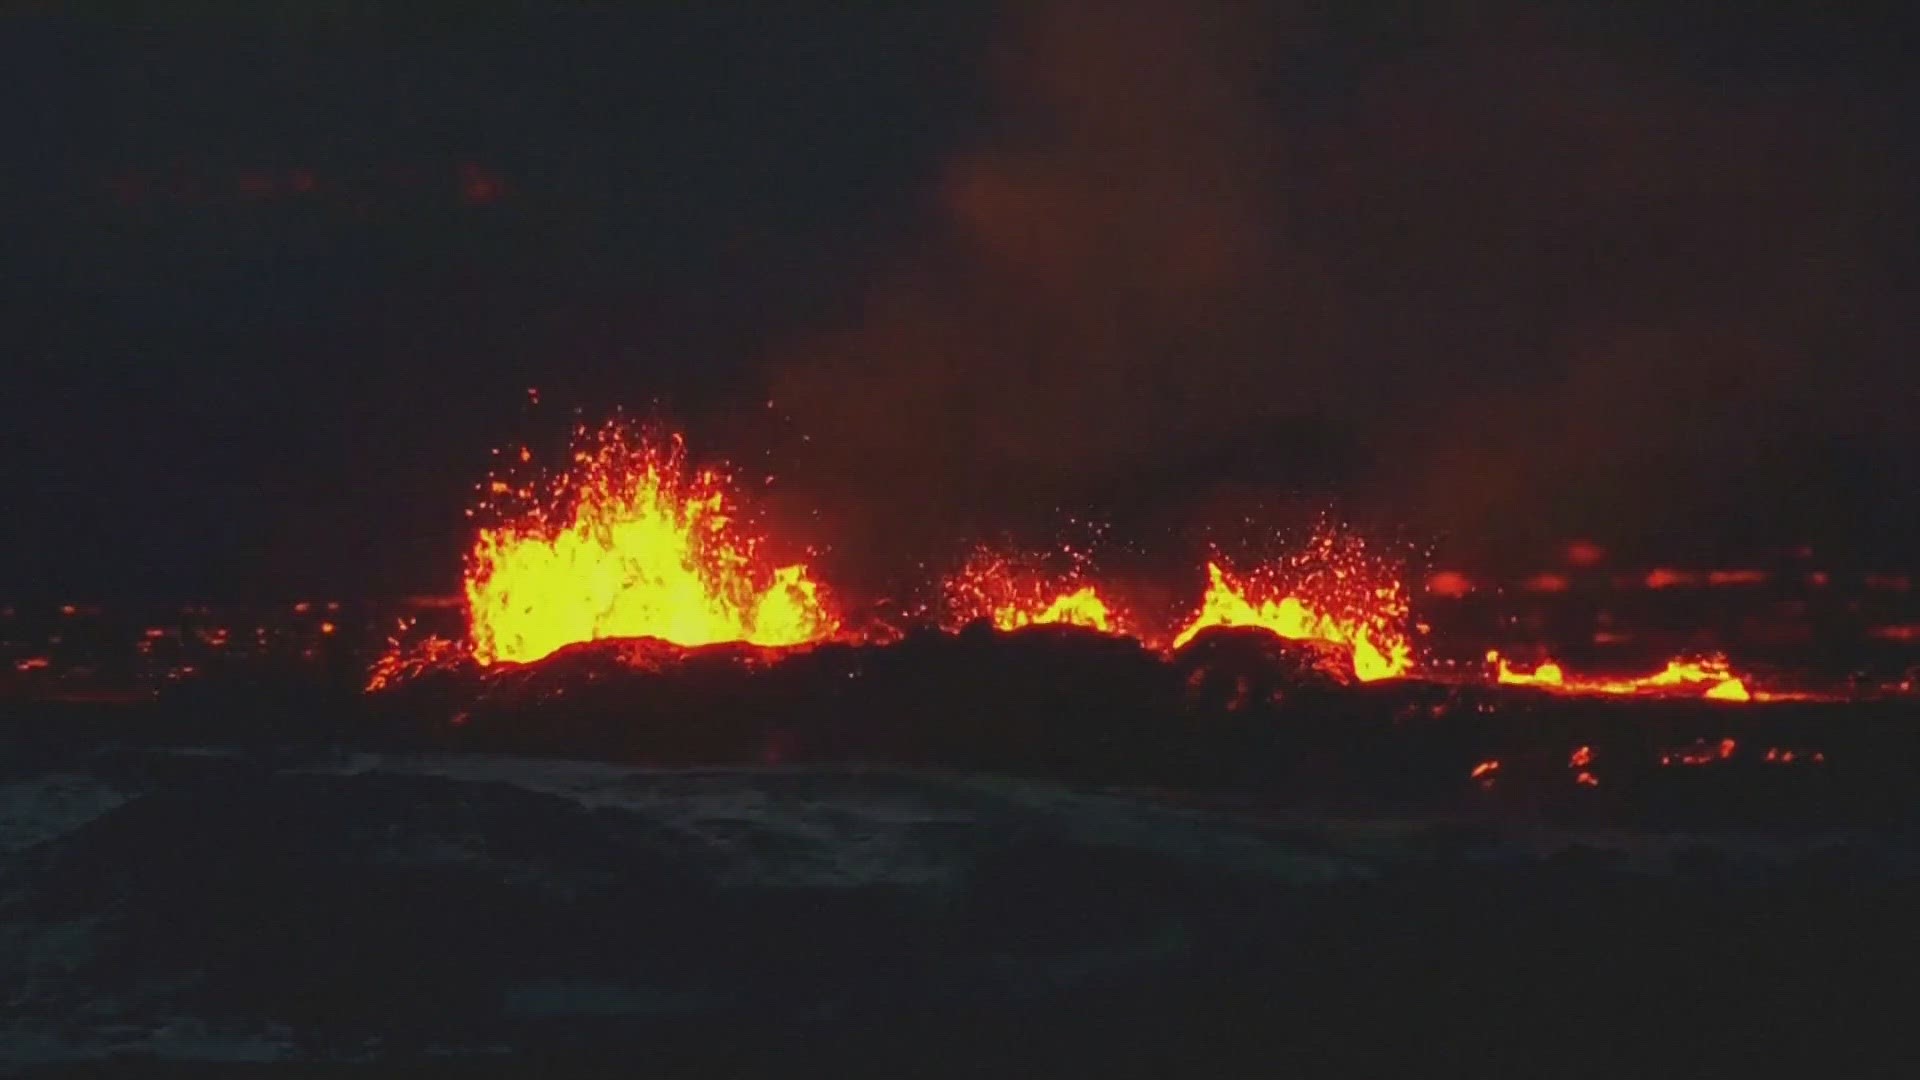 The eruption appears to have occurred about 2.5 miles from the town of Grindavik near the main airport.